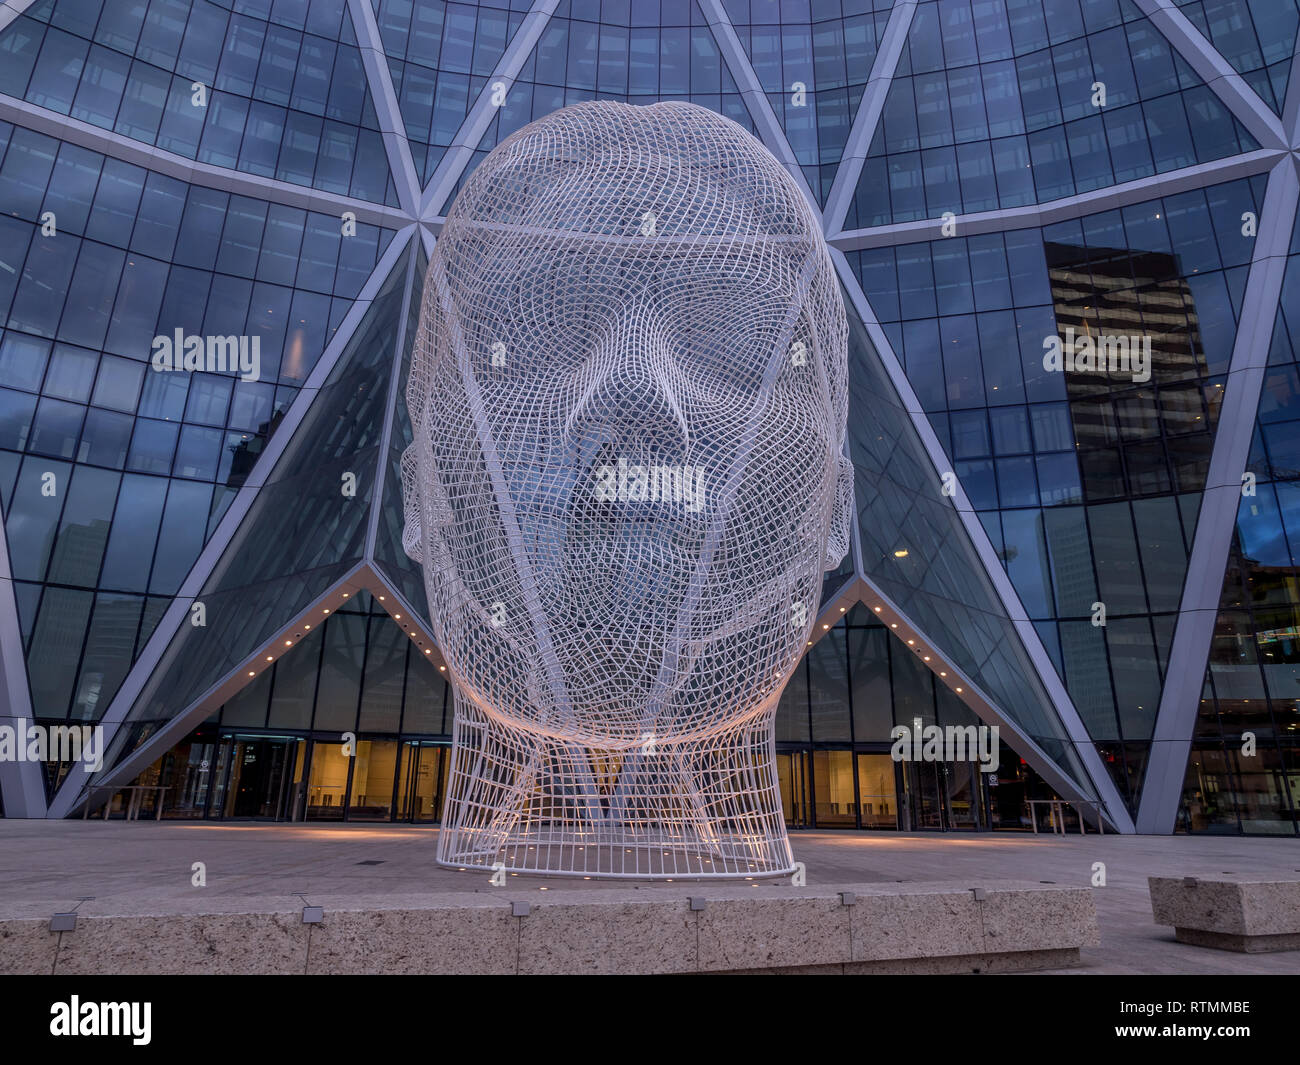 Wonderland sculpture by Jaume Plensa in the front of the Bow Tower on November 6, 2016 in Calgary, Alberta, Canada. Jaume Plensa is a Catalan Spanish Stock Photo